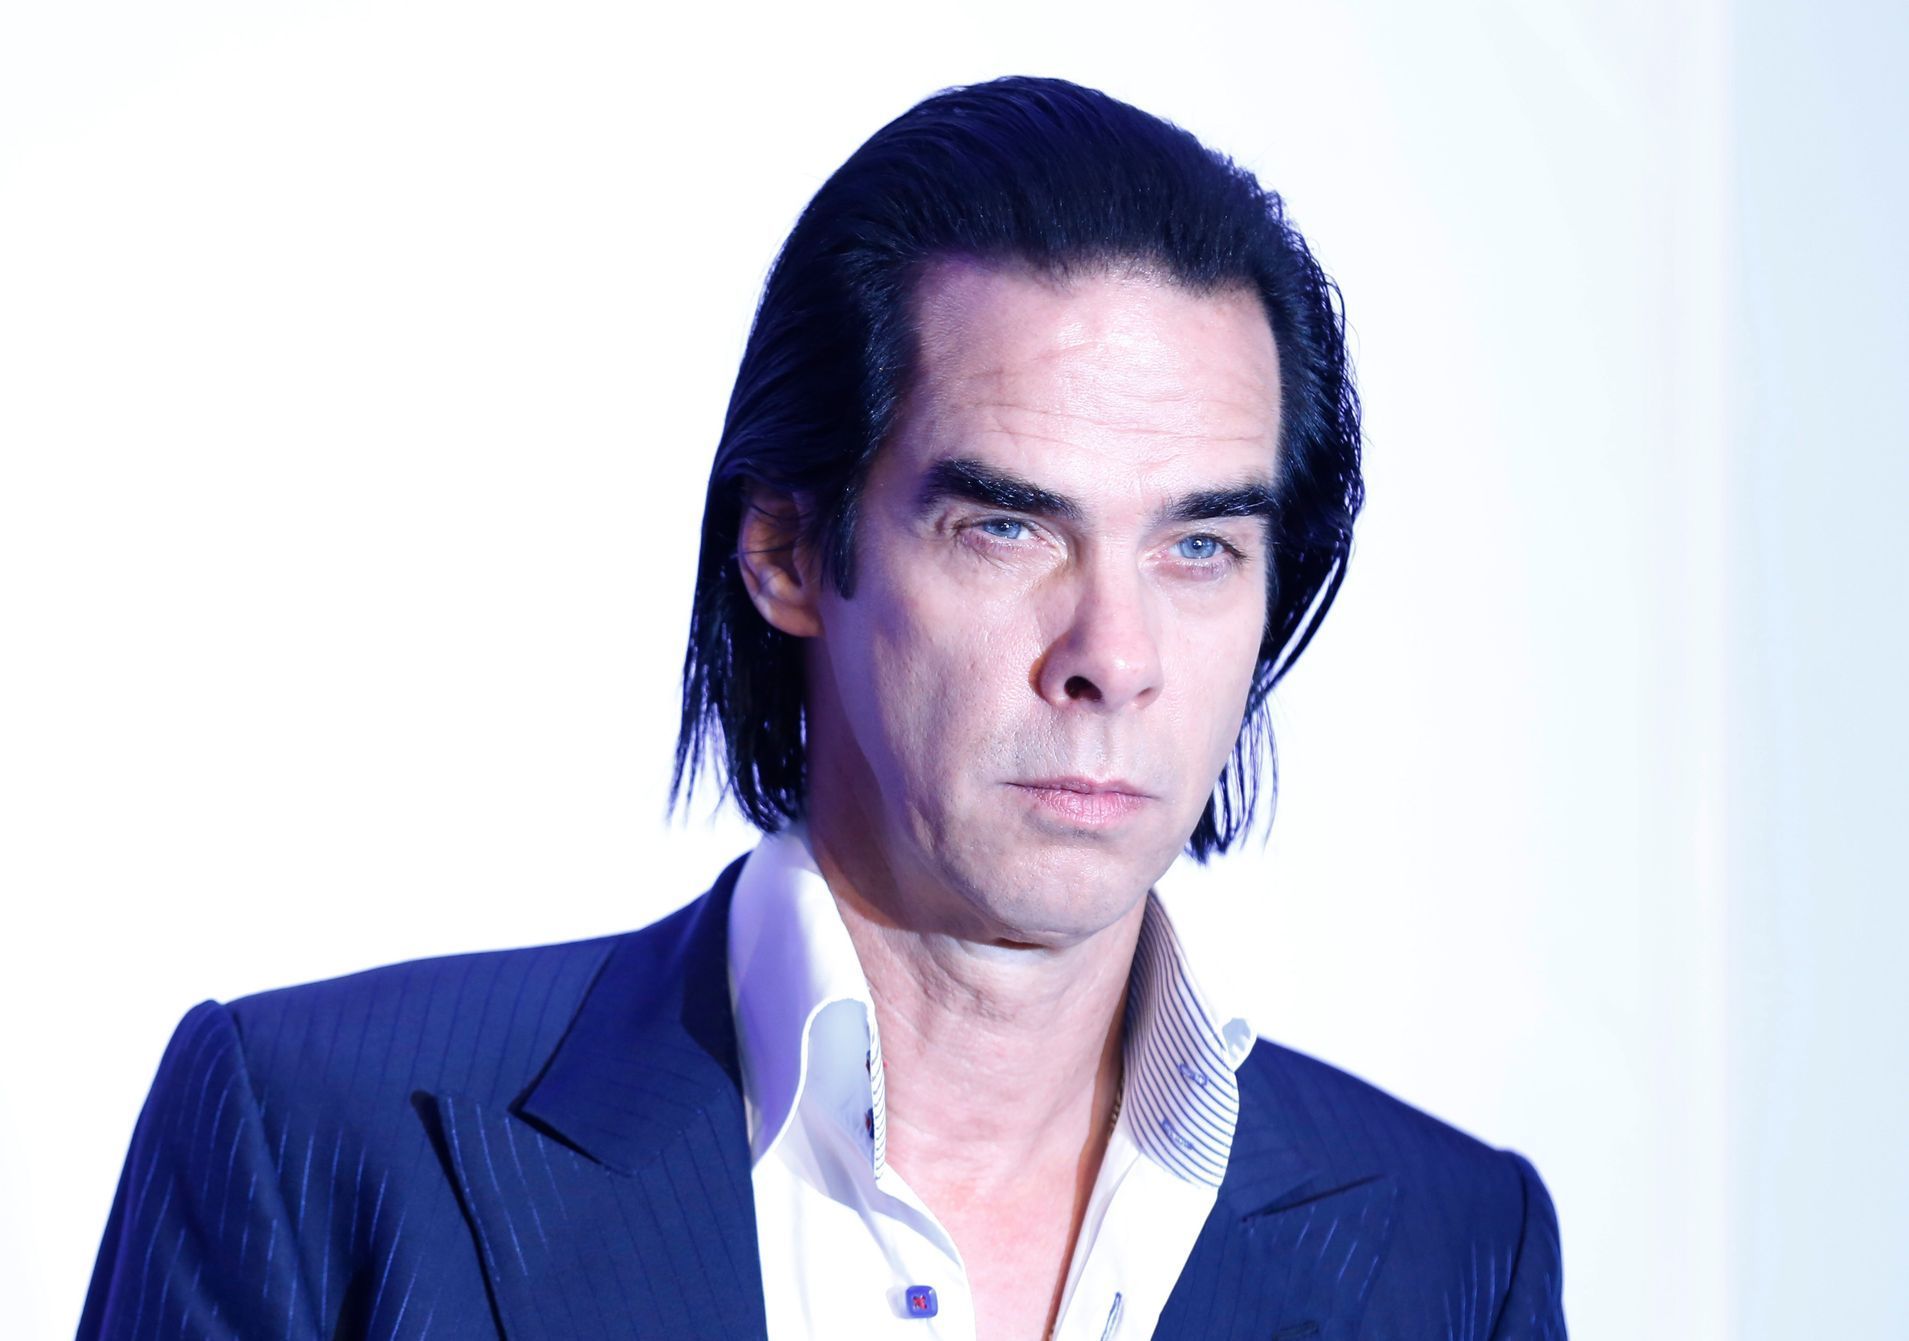 Singer Nick Cave arrives for a gala screening of '20,000 Days on Earth' at the Barbican in London